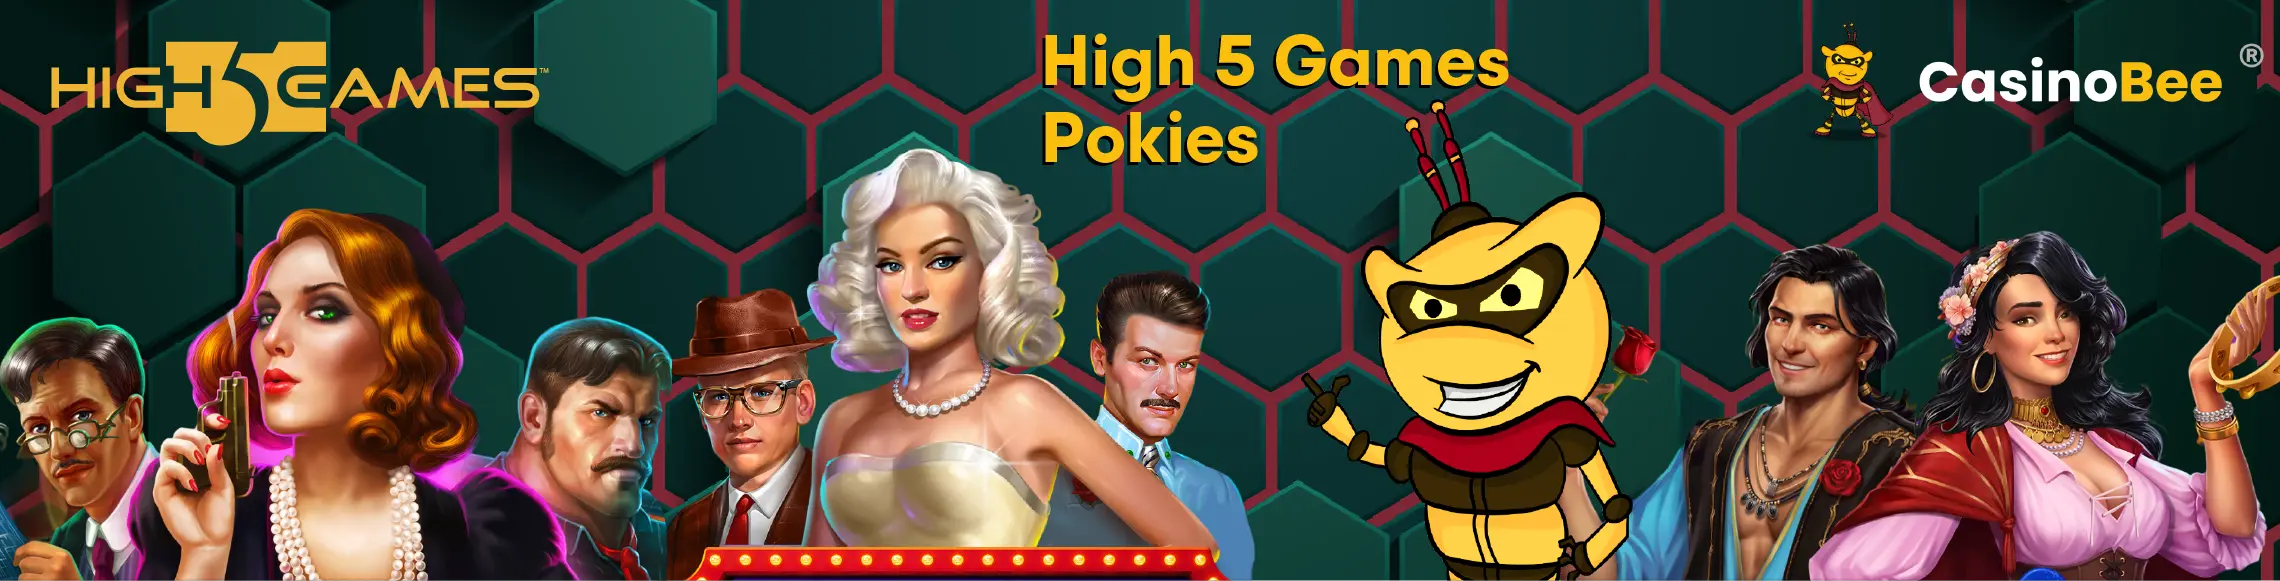 Overview of High 5 Games Pokies